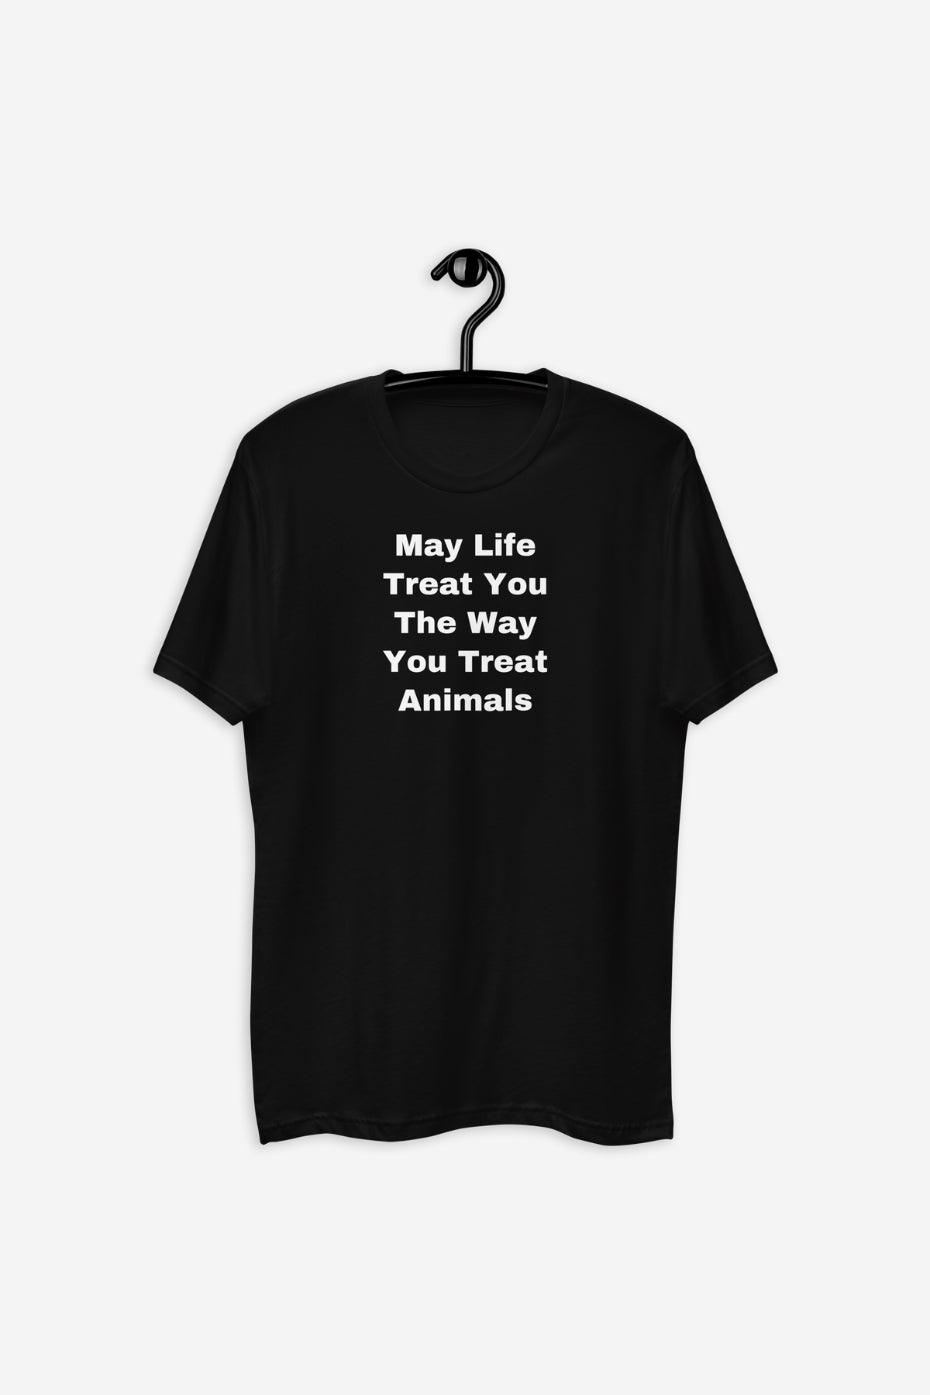 May Life Men's Fitted T-Shirt